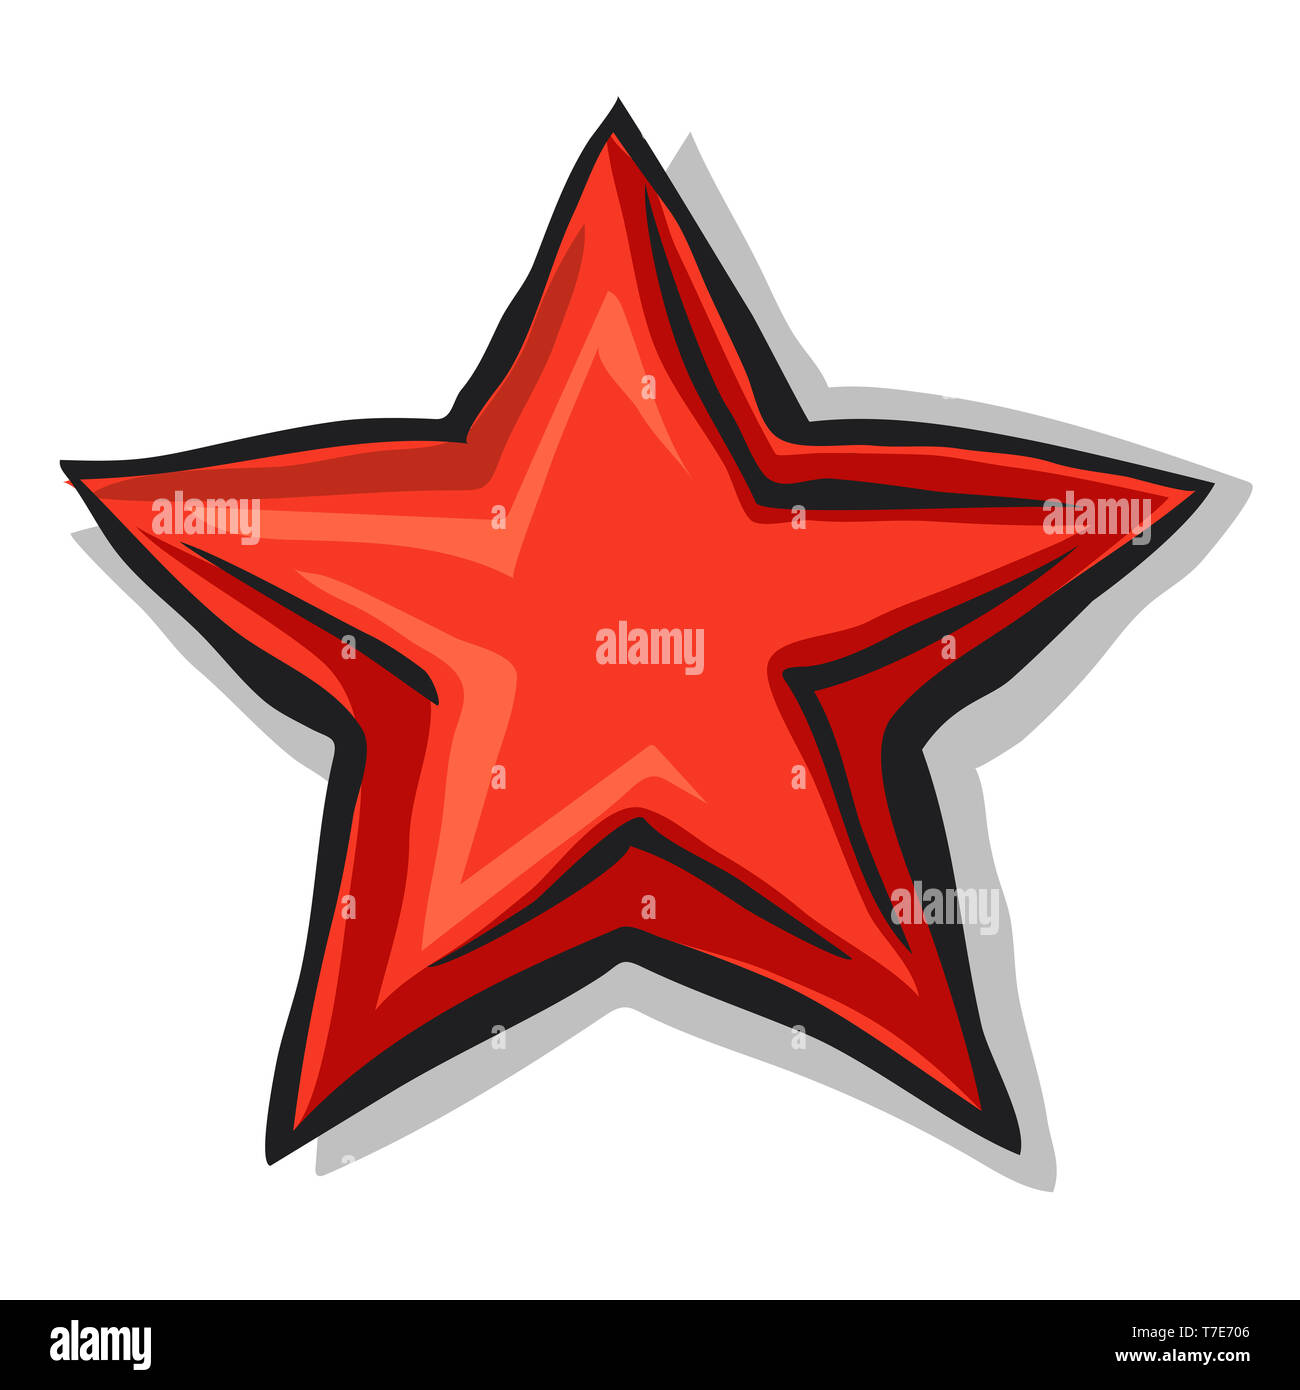 Big cartoon red star with shadow and black contour Stock Photo